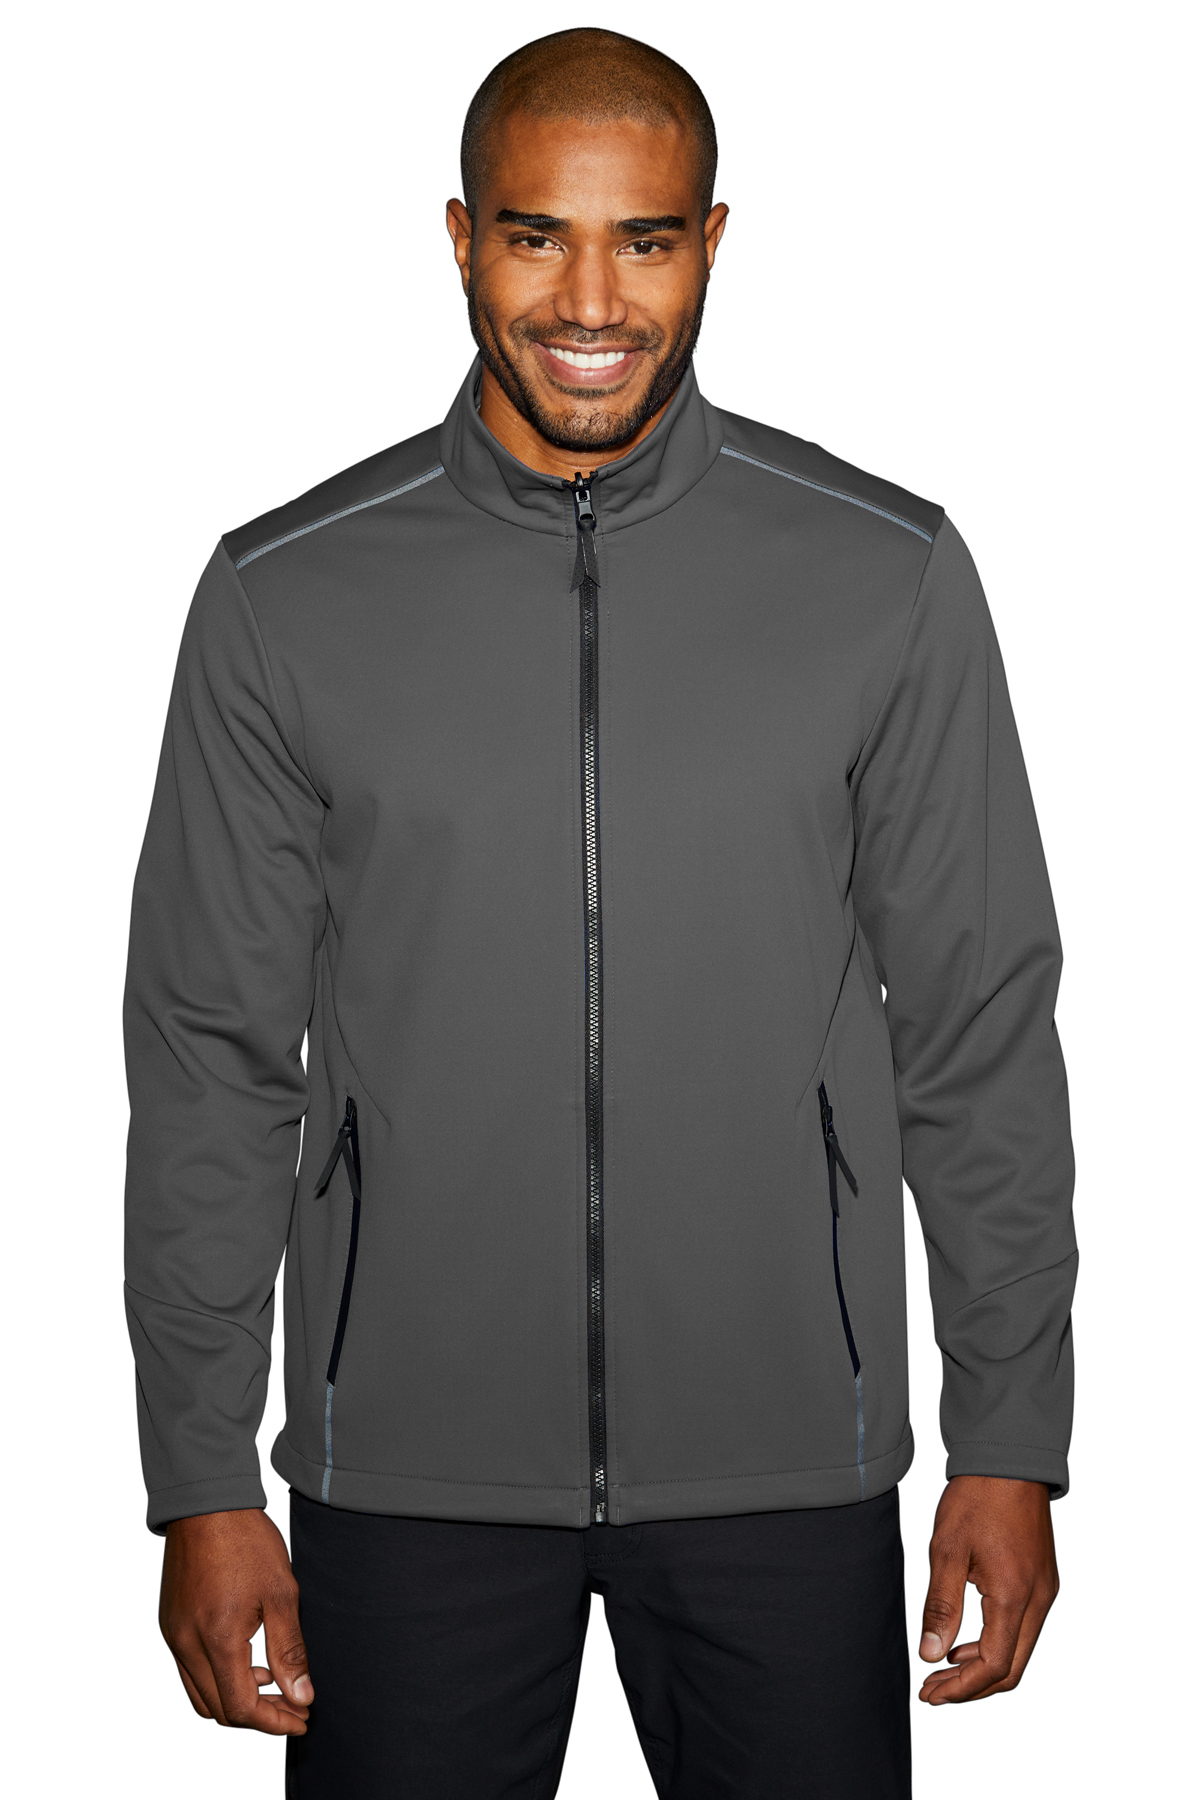 Port Authority Collective Tech Soft Shell Jacket | Product | SanMar